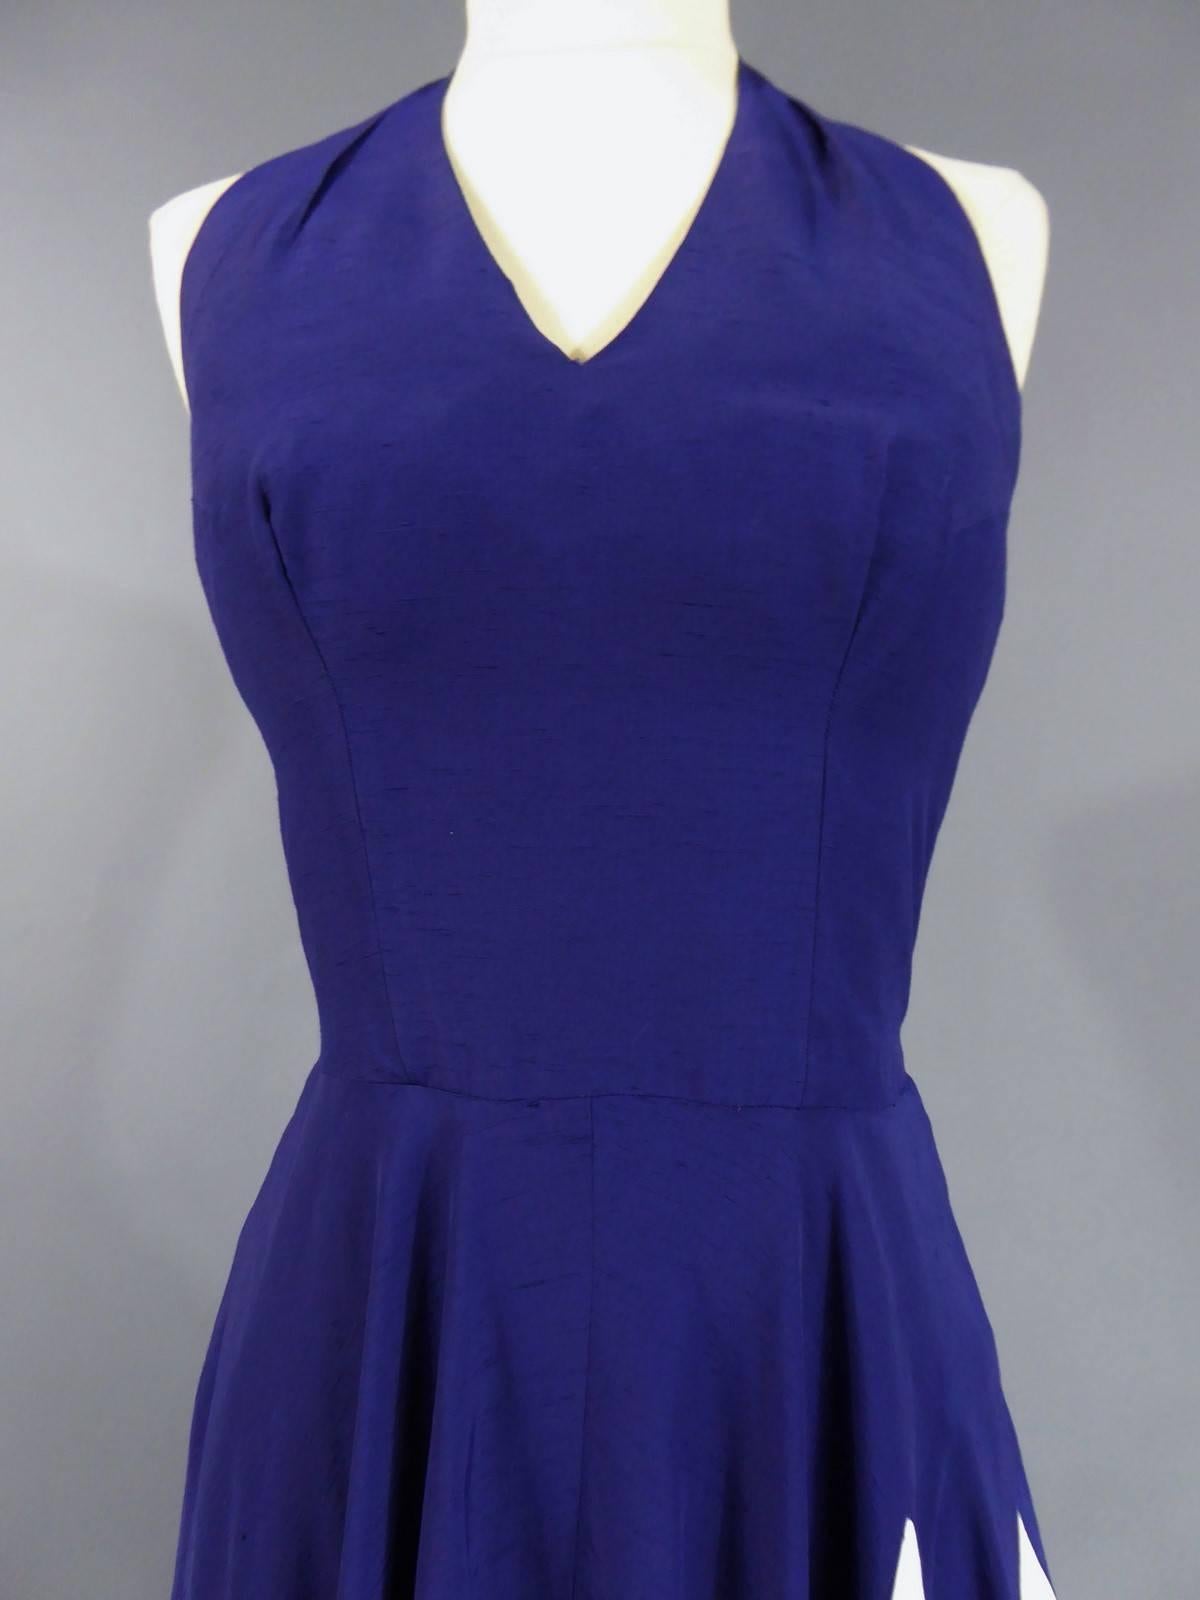 Circa 1950

Henry à la Pensée sapphire blue and white slubbed halter-neck dress from the 1950s. Blue points falling dramatically on the white skirt. Zip closure in the back. Natural silk. White tag with purple graphism saying Henry à la Pensée Made